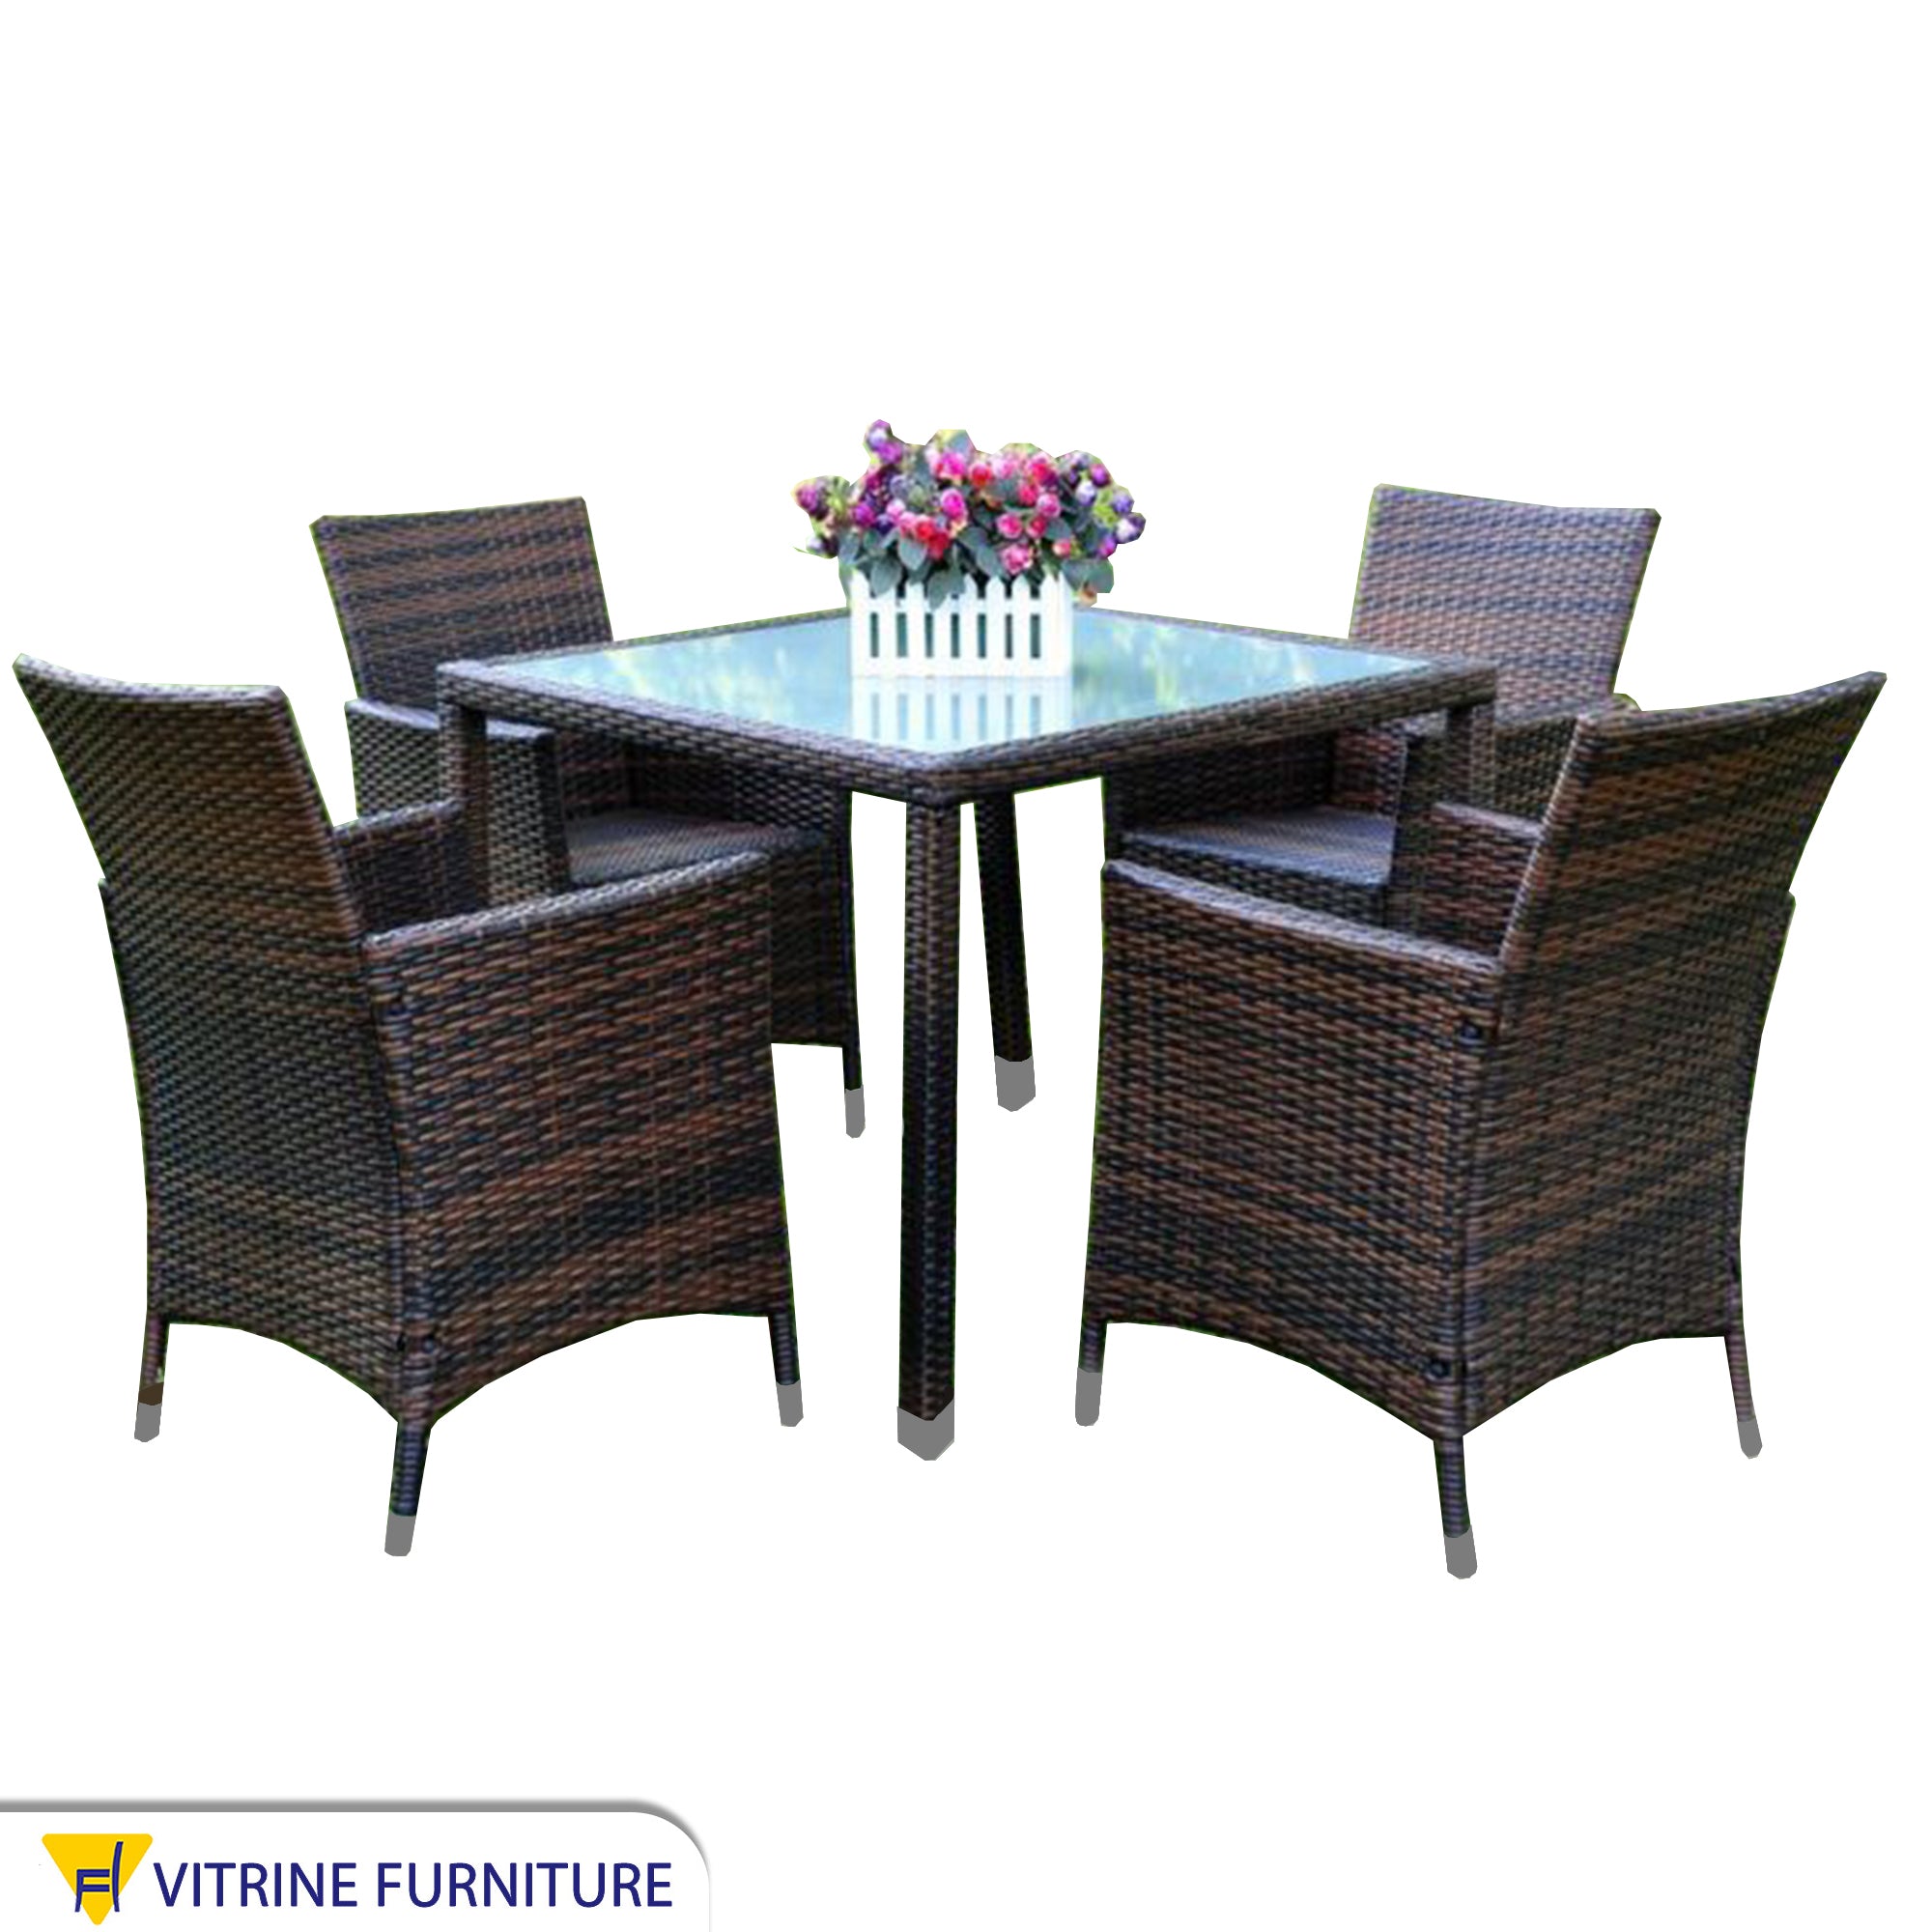 Rattan chairs and table for the garden